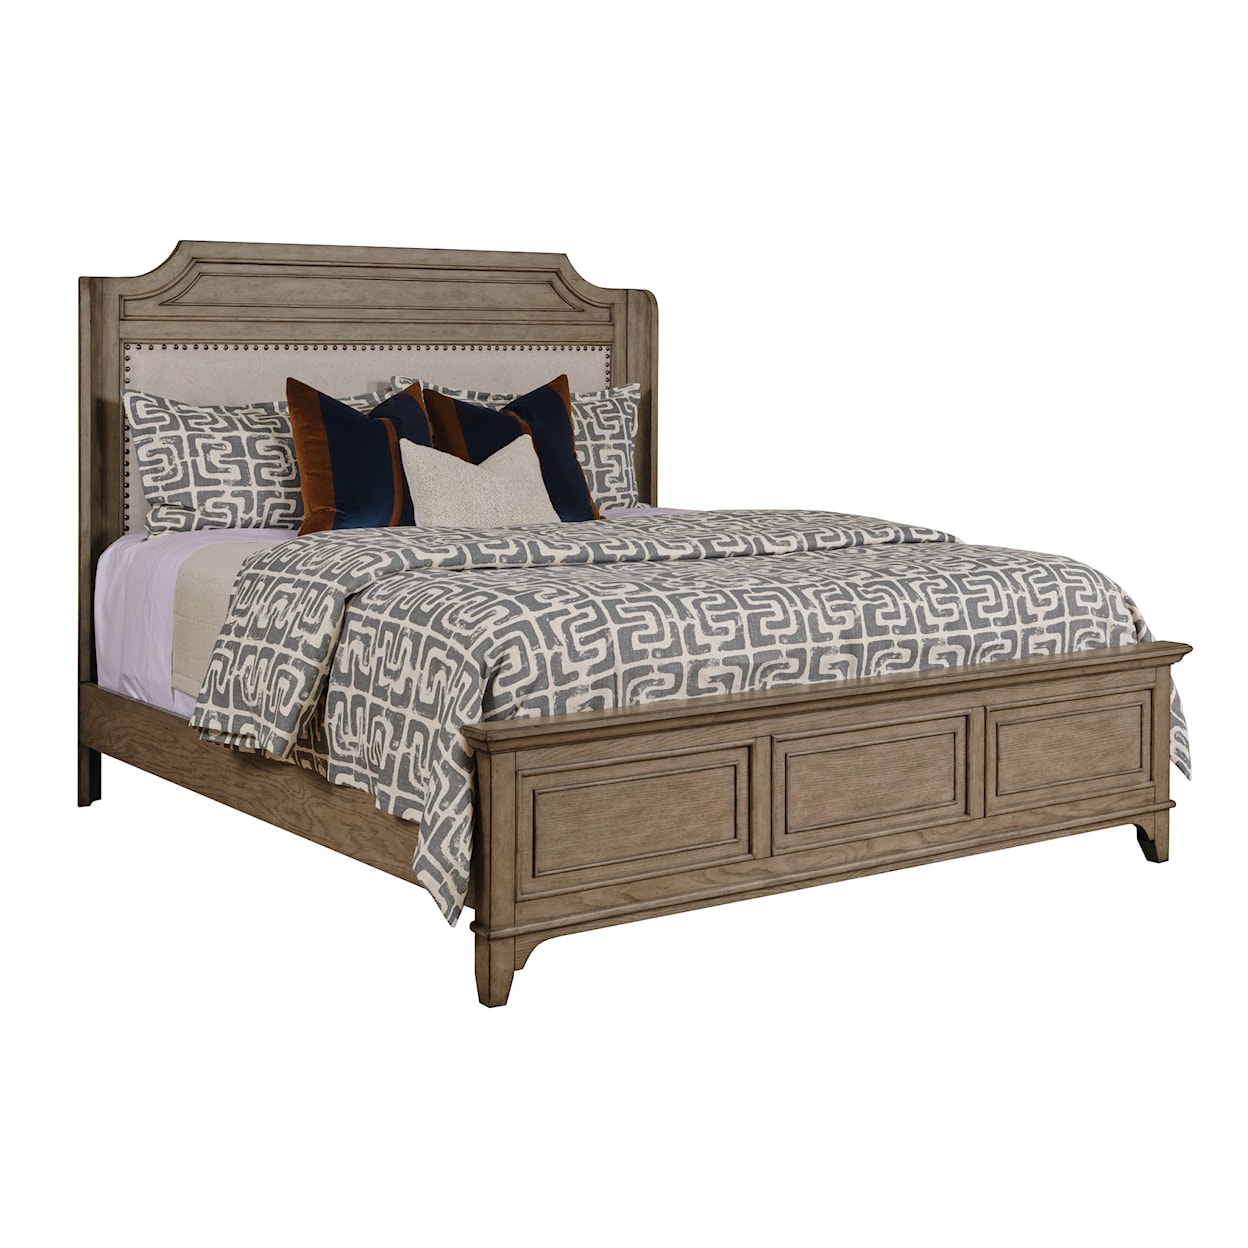 American Drew Carmine Engels Cal King Upholstered Bed - Complete